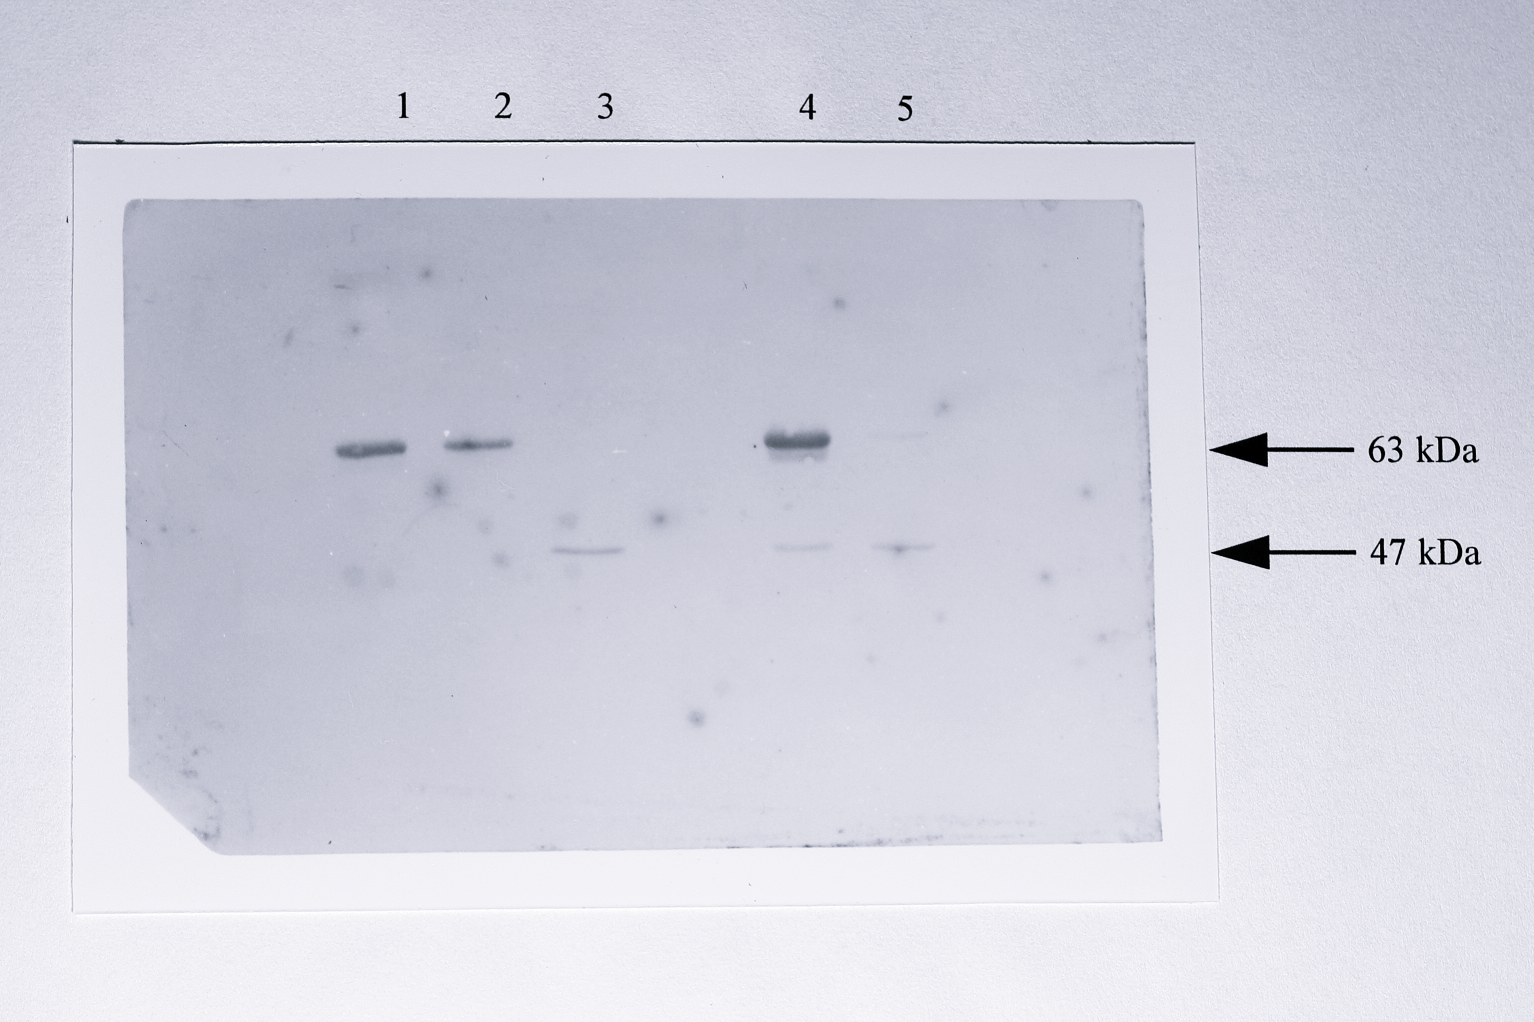 Western blot of total soluble extracts from wild-type _T. pantotropha_, _T. pantotropha_ K7, _T. pantotropha_ $\Delta7$, T. pantotropha $\Delta7$ [pMMBSEK] and _T. pantotropha_ $\Delta7$ [pMMBY25F] using antibody raised against _P. denitrificans_ cytochrome _cd_$_1$. 40 $\mu$g of protein was loaded in each lane and the samples were separated in a 6% acrylamide SDS-PAGE gel, transferred to nitrocellulose by semi-dry electroblotting and probed using the anti-cytochrome _cd_$_1$ antibody. The 63 kDa band (mature cytochrome _cd_$_1$) and 47 kDa band (truncated cytochrome _cd_$_1$) are indicated by the upper and lower arrows respectively. Lanes: 1, _T. pantotropha_ wild-type, 2, _T. pantotropha_ K7, 3, _T. pantotropha_ $\Delta7$, 4, _T. pantotropha_ $\Delta7$ [pMMBSEK], 5, _T. pantotropha_ $\Delta7$ [pMMBY25F].